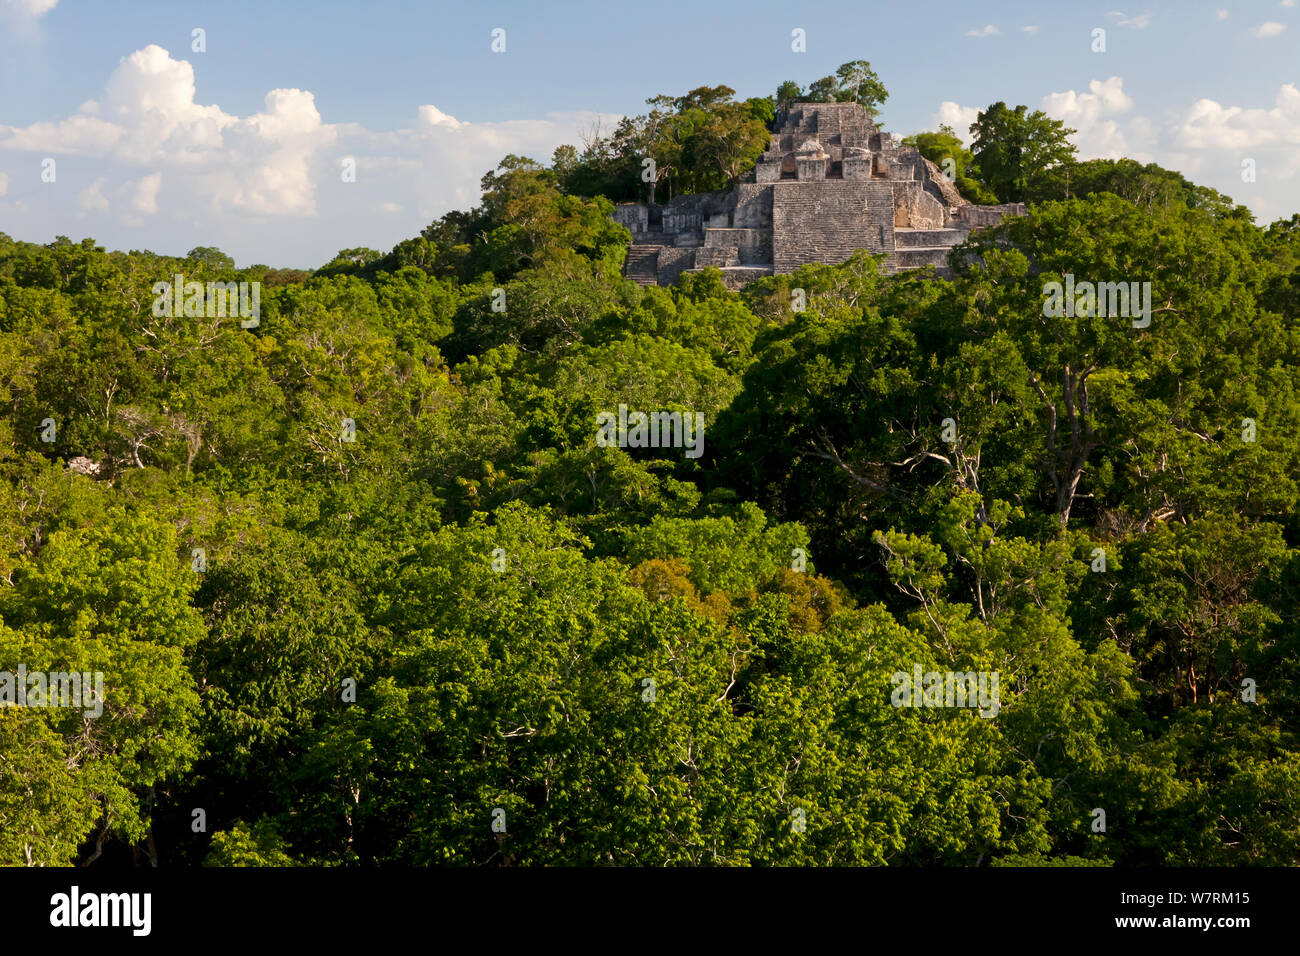 Calakmul, ancient Maya city surrounded by tropical rainforest, Calakmul Biosphere Reserve, Yucatan Peninsula, Mexico, August Stock Photo